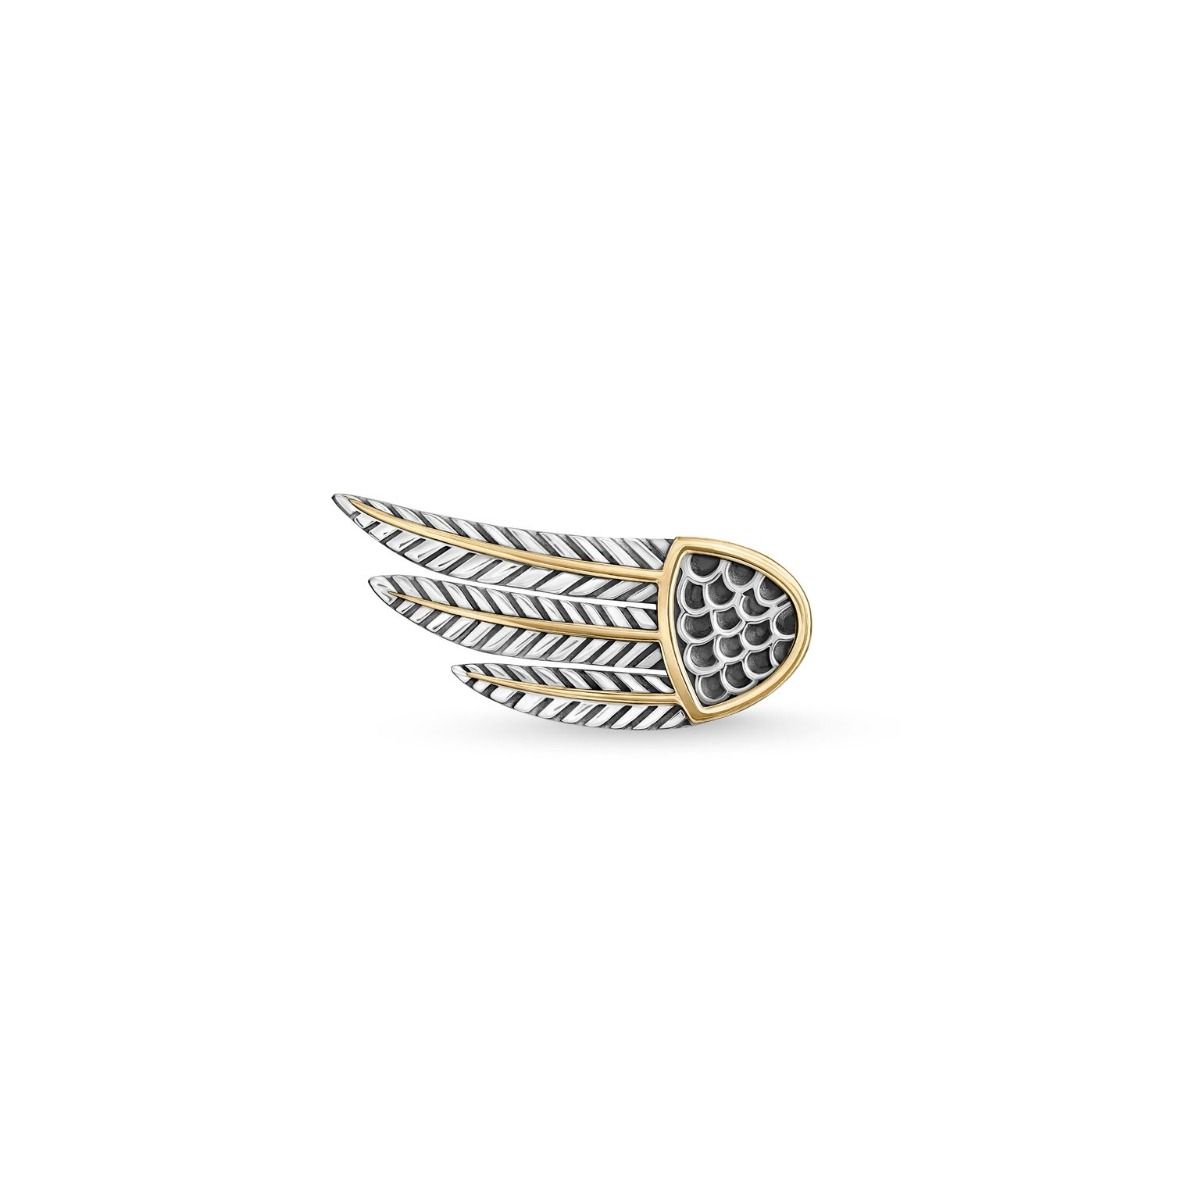 Wing Pin by Azza Fahmy - Designer Pins